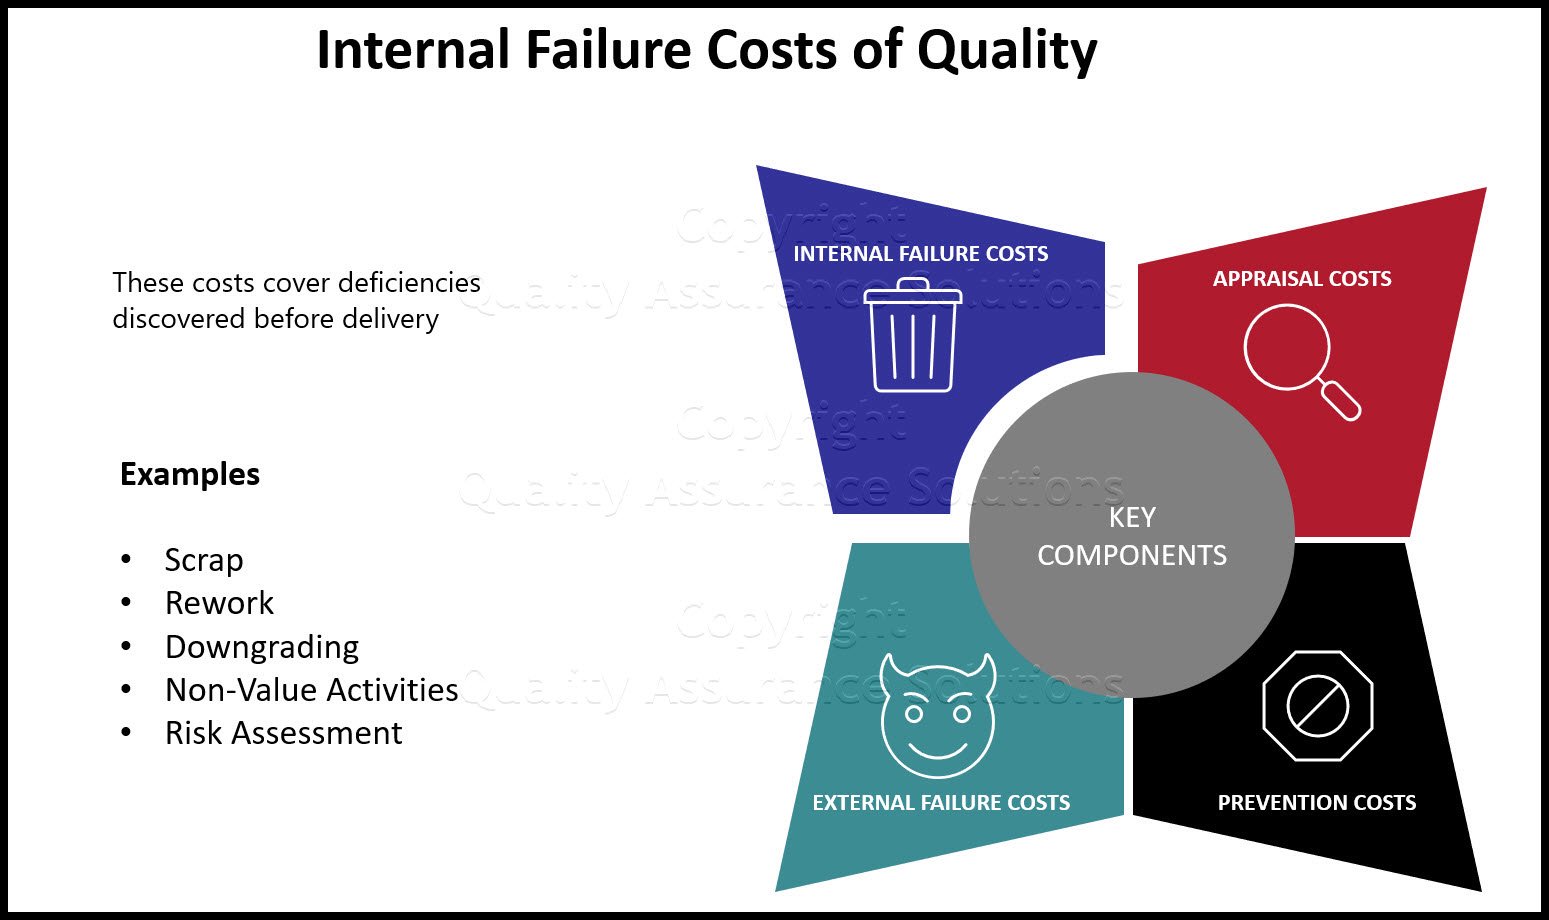 internal failure costs are costs of deficiencies discovered before delivery which are associated with the failure